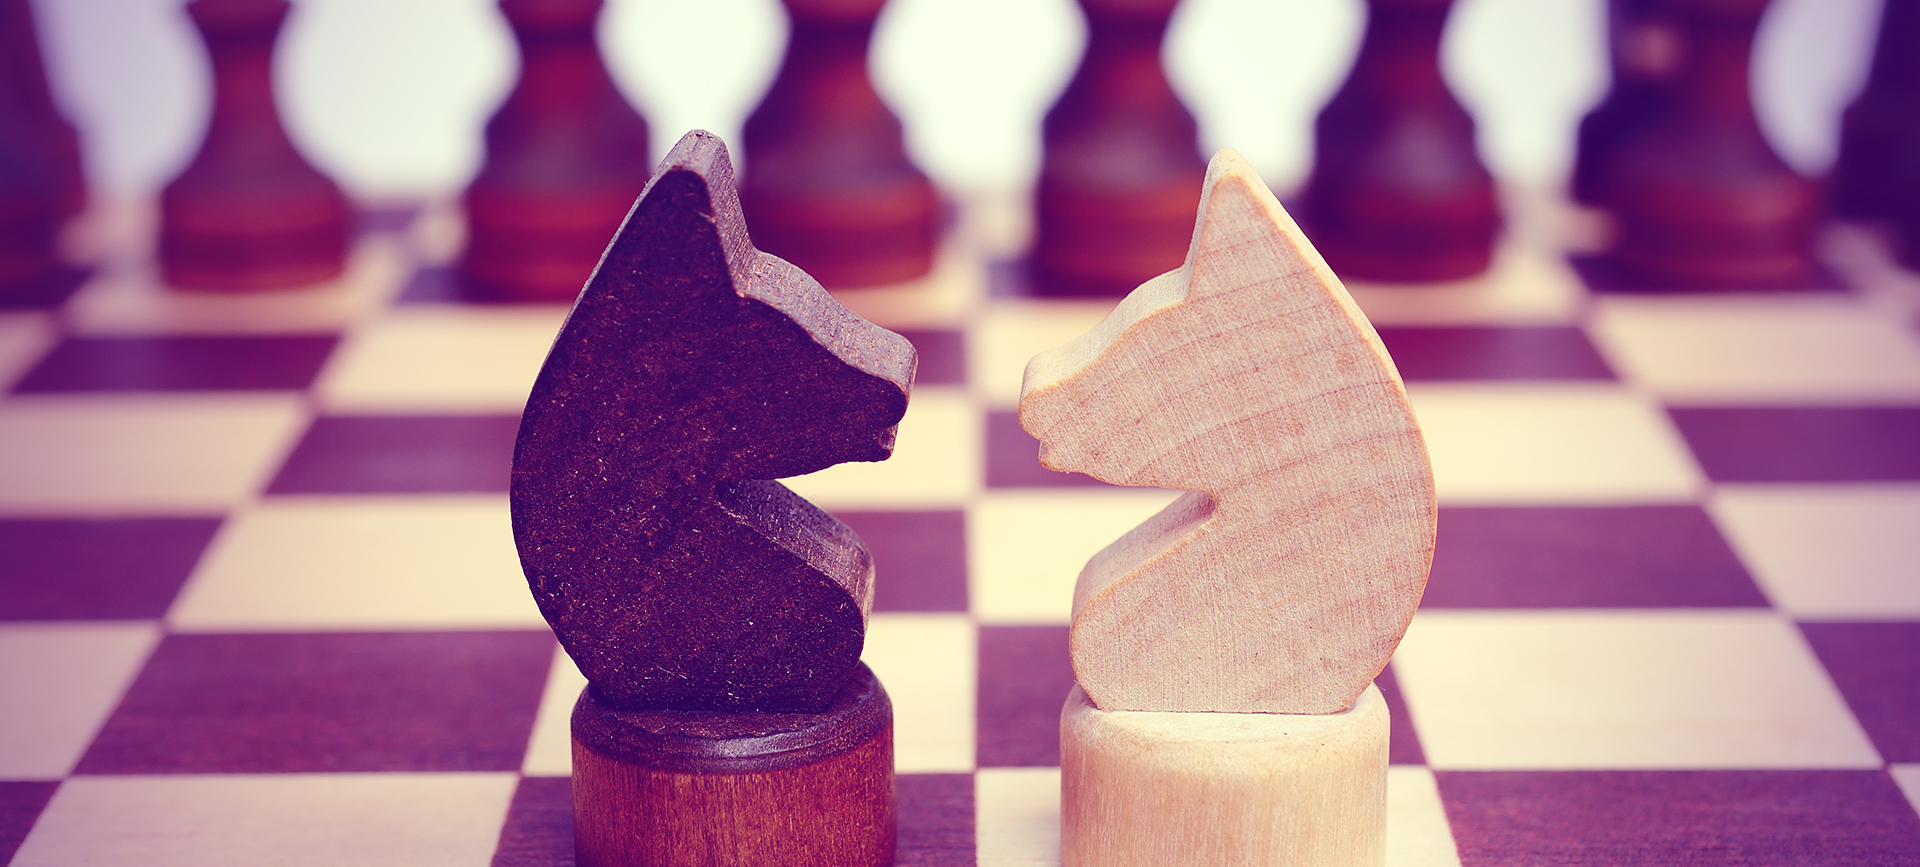 Two knight on a chessboard. Light and dark. Confrontation. Against each other. Forehead to forehead. Vintage toning.